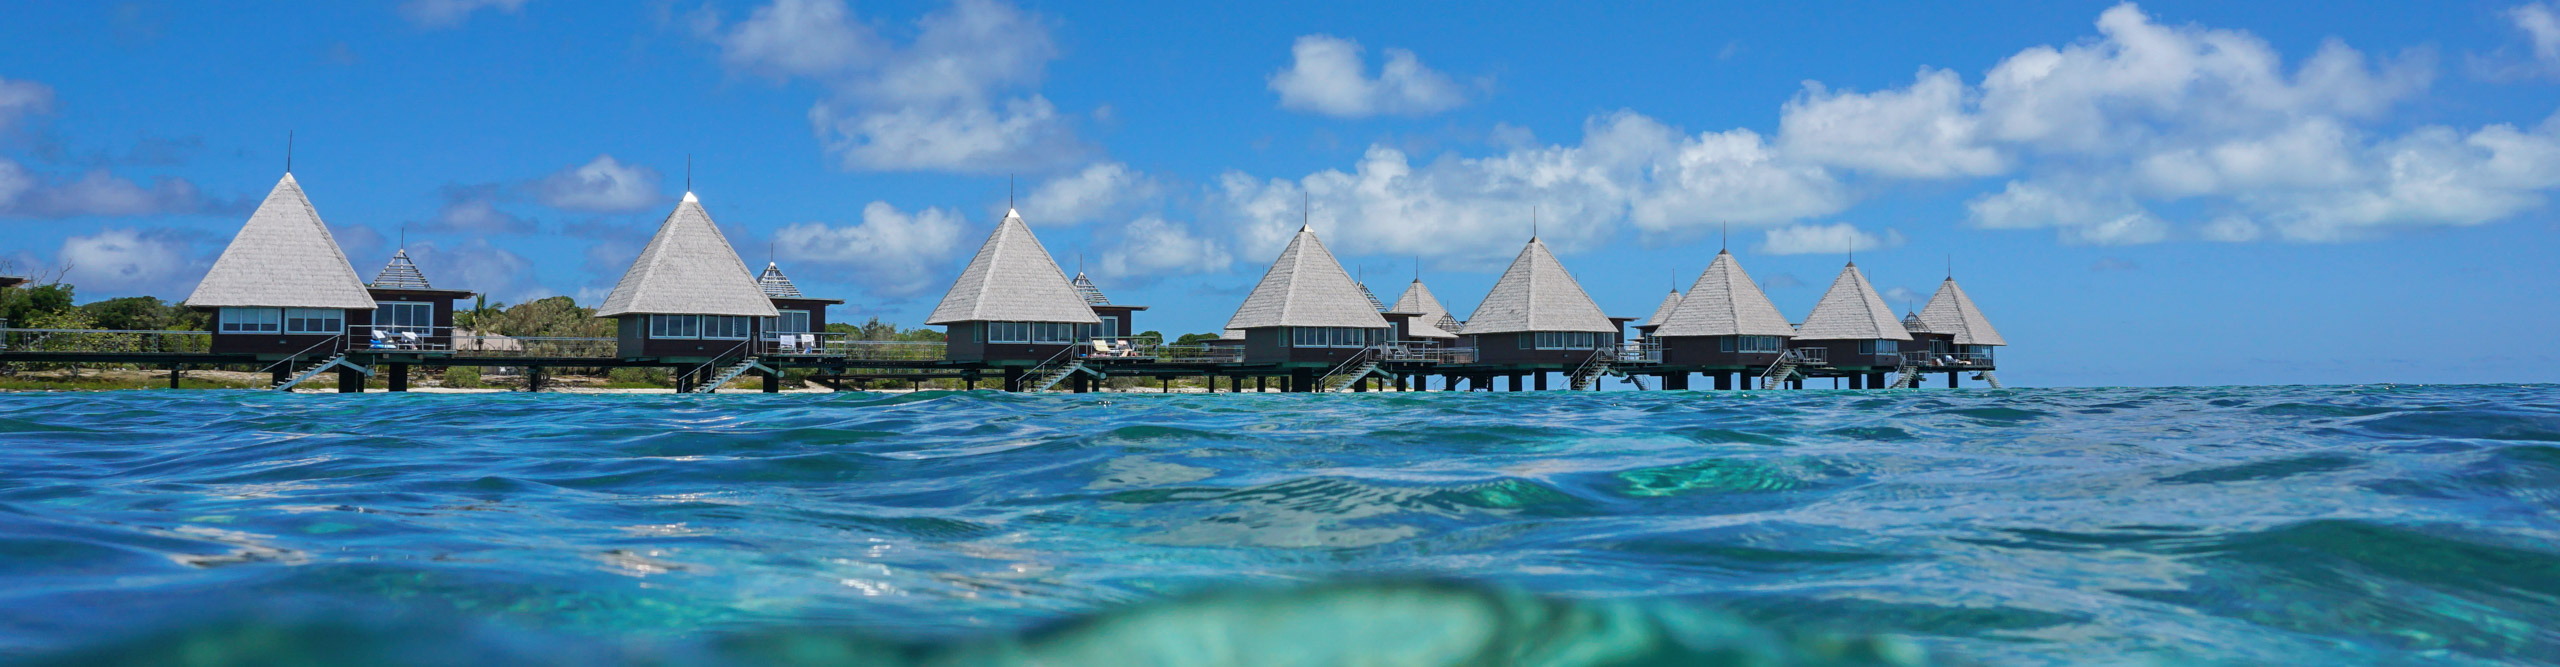 Overwater bungalows with clear blue water and blue skies, Caledonia